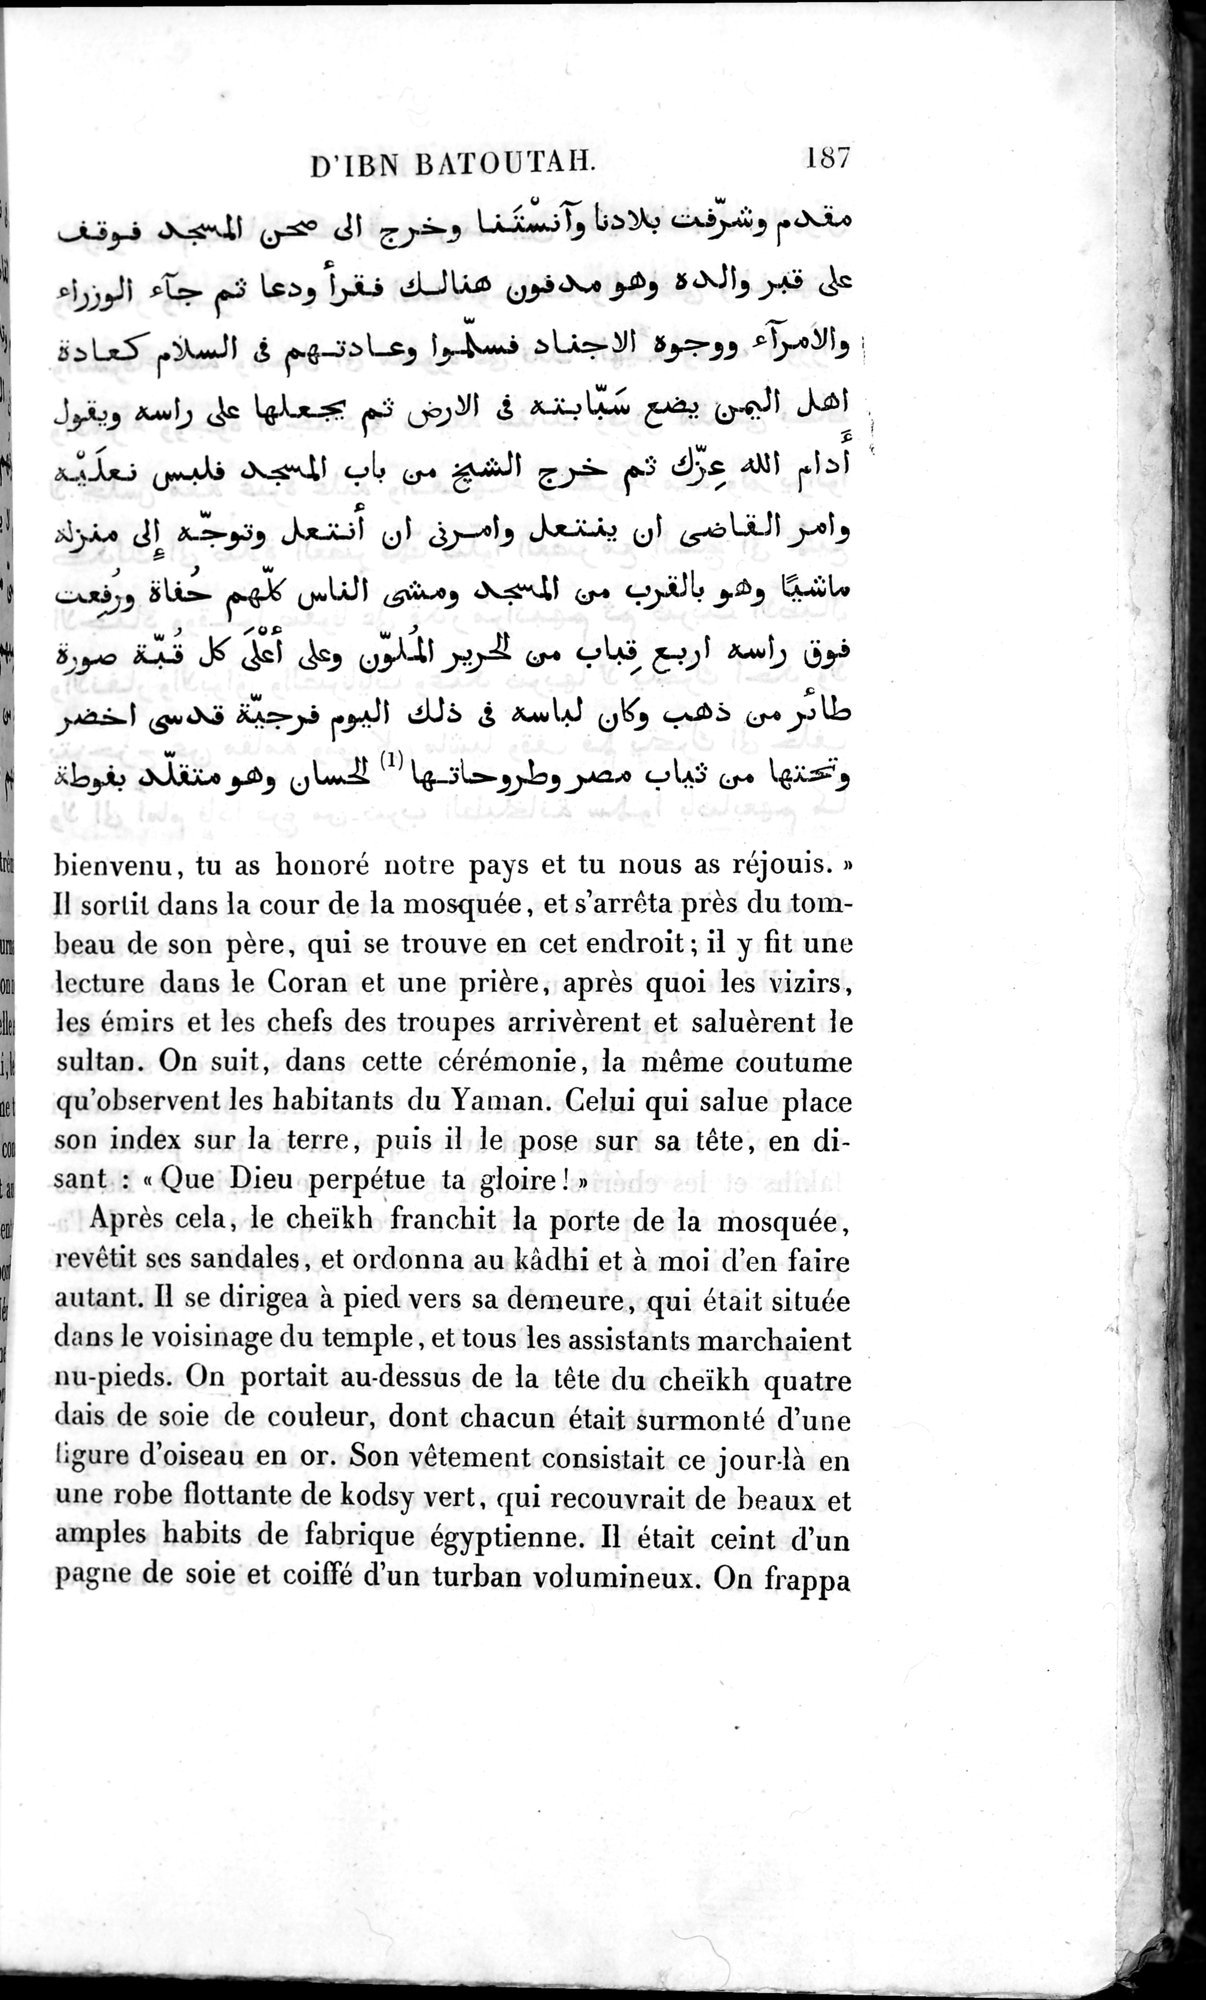 Voyages d'Ibn Batoutah : vol.2 / Page 215 (Grayscale High Resolution Image)